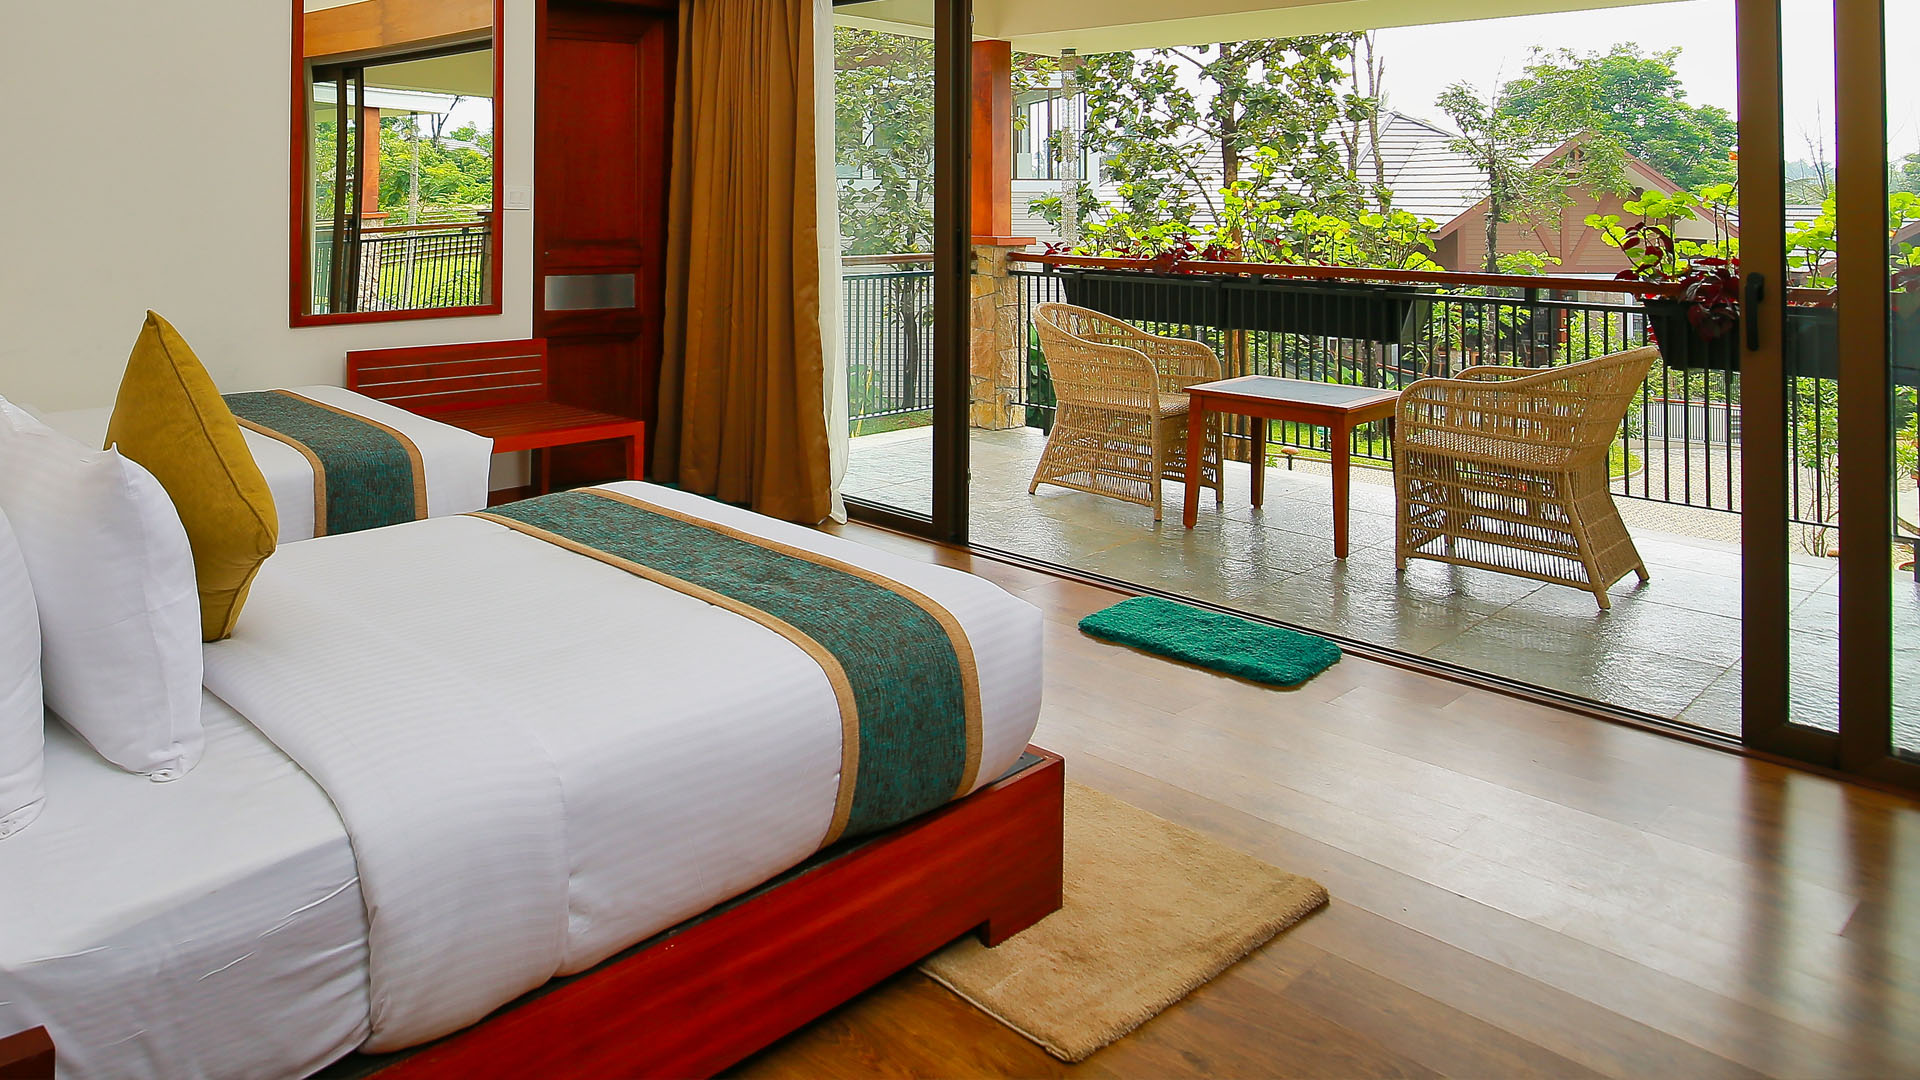 Staycation at Morickap Resort in Wayanad with your Loved Ones